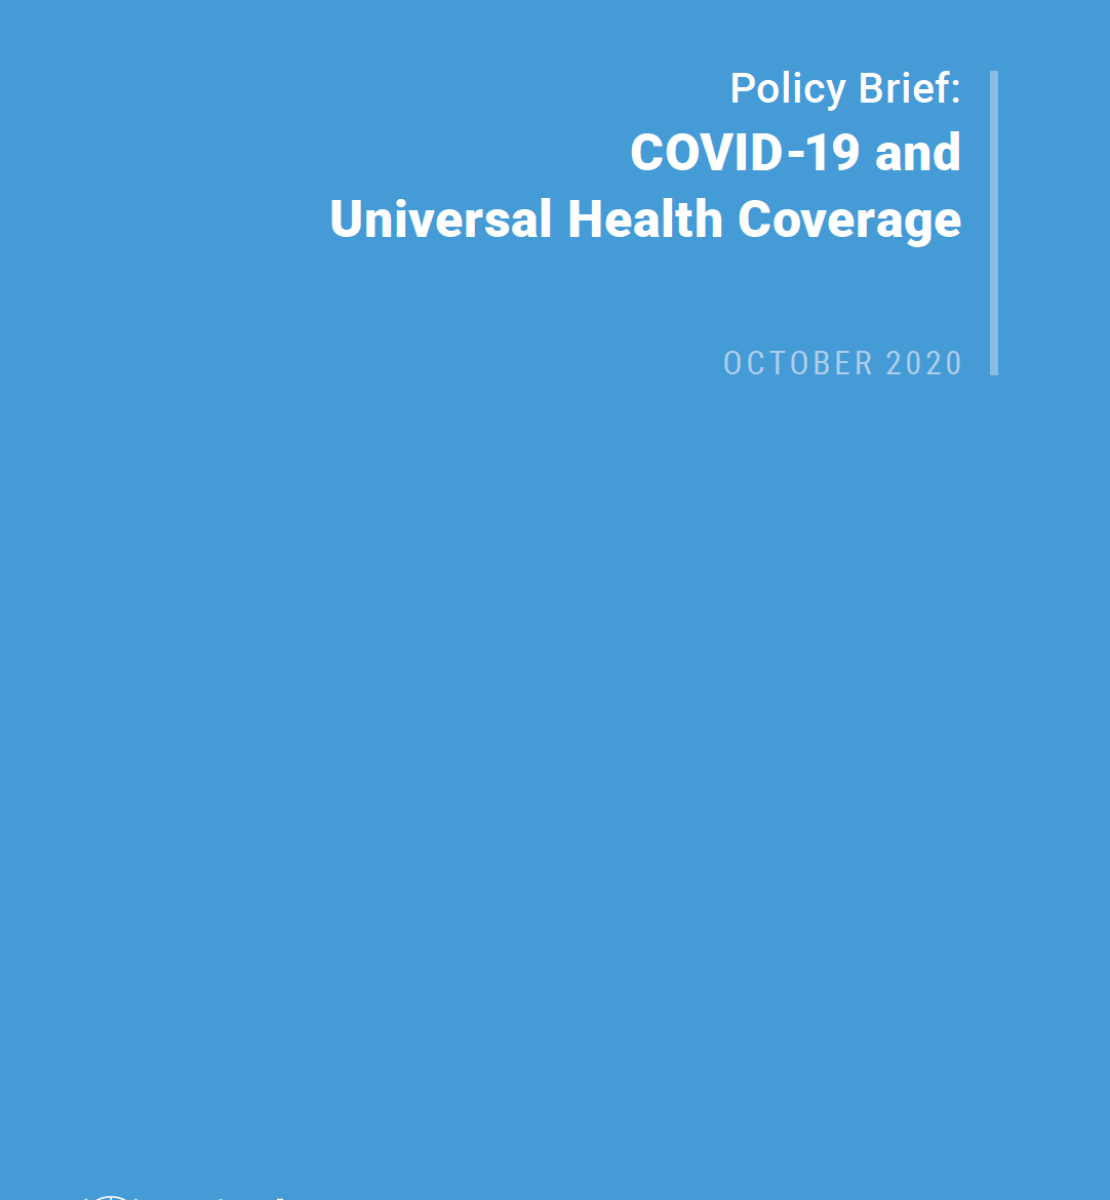 Cover shows the title "Policy Brief: COVID-19 and Universal Health Coverage" against a solid blue background with the UN emblem on the lower left side.